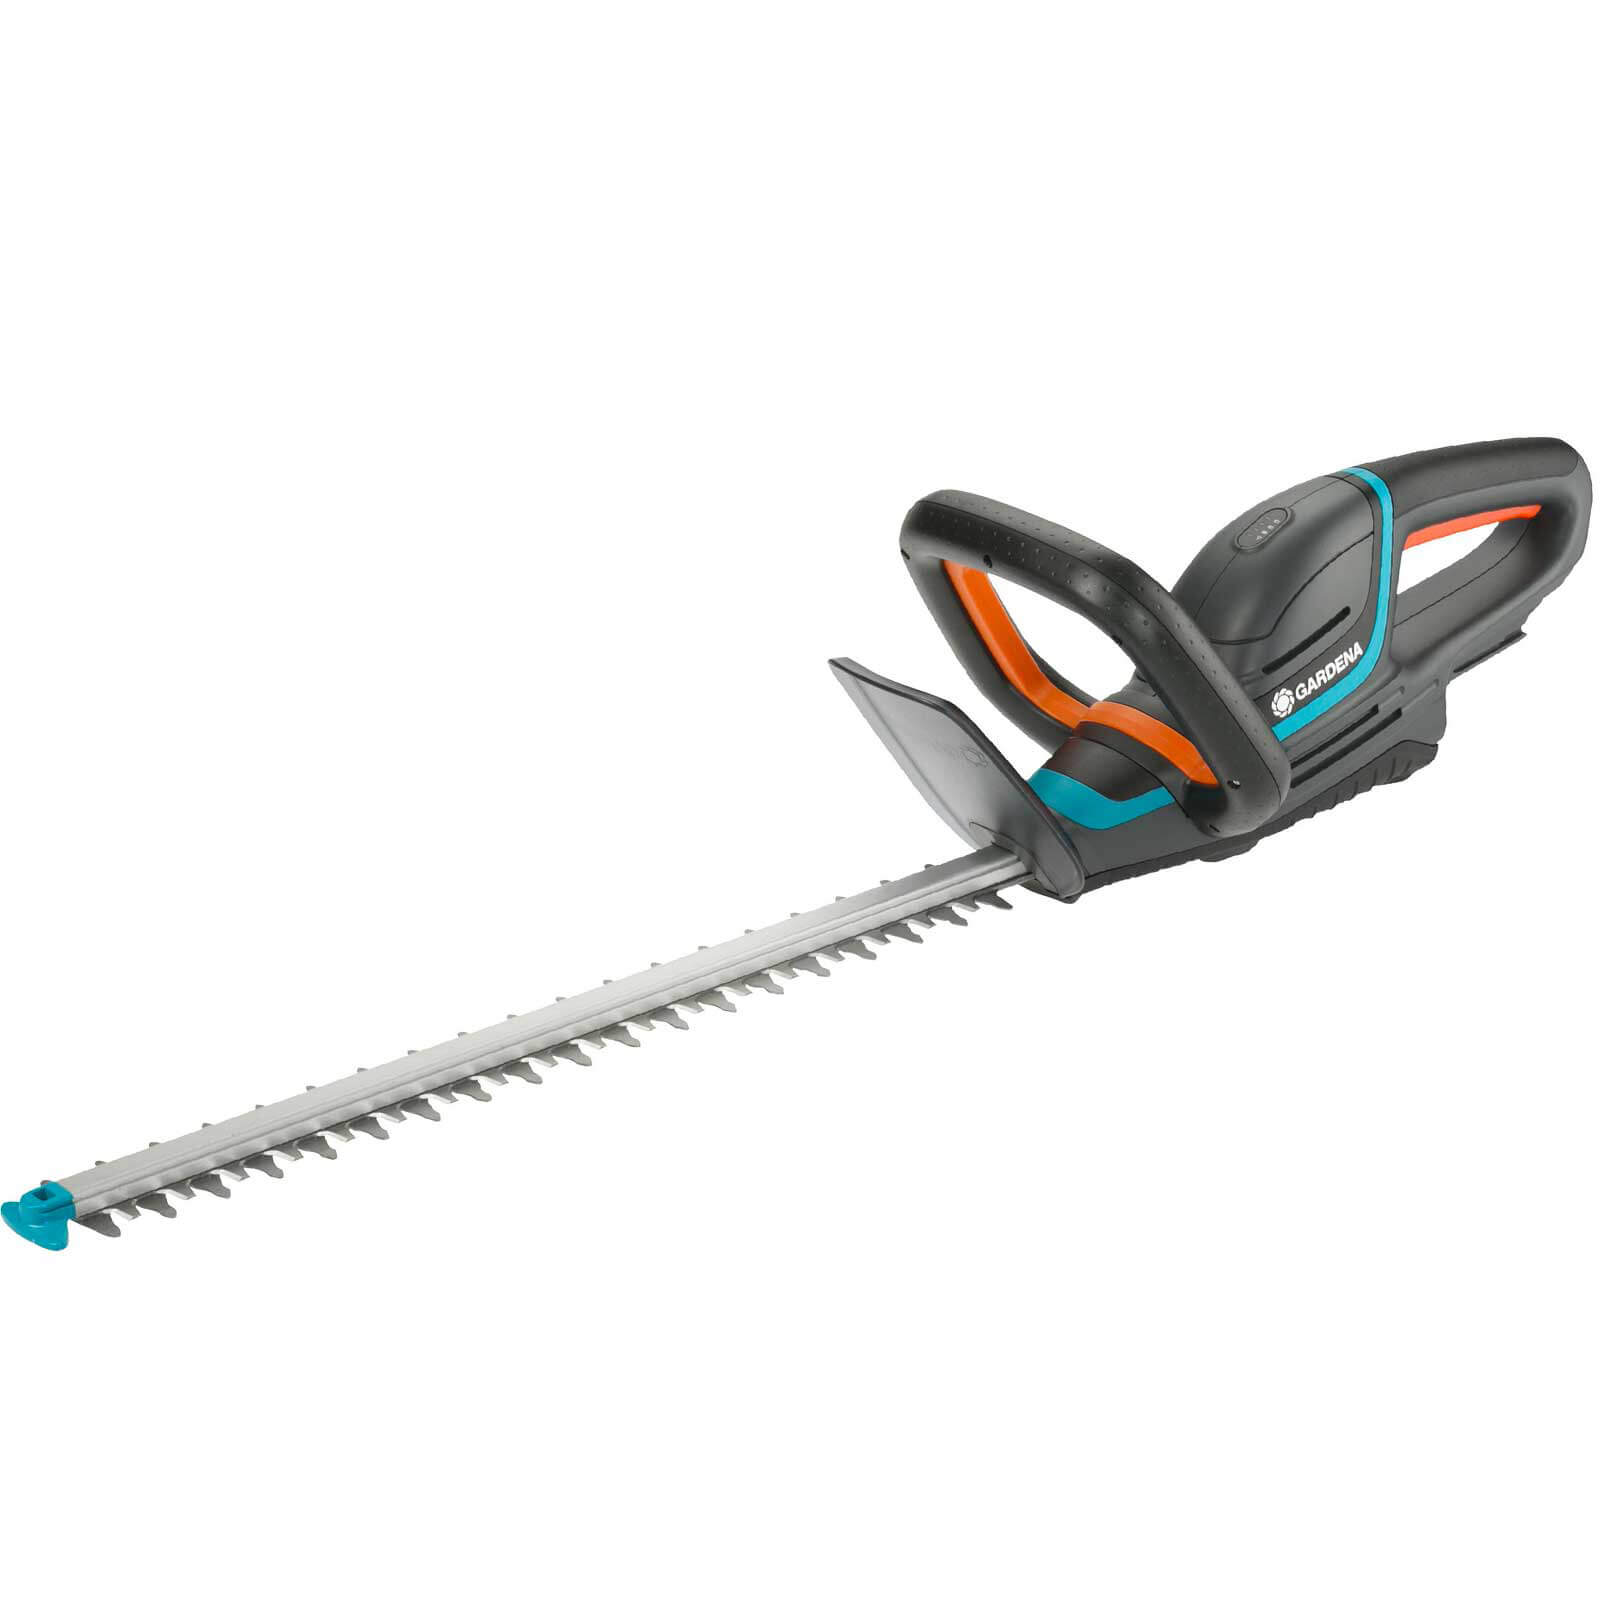 Image of Gardena COMFORTCUT P4A 18v Cordless Hedge Trimmer 500mm No Batteries No Charger